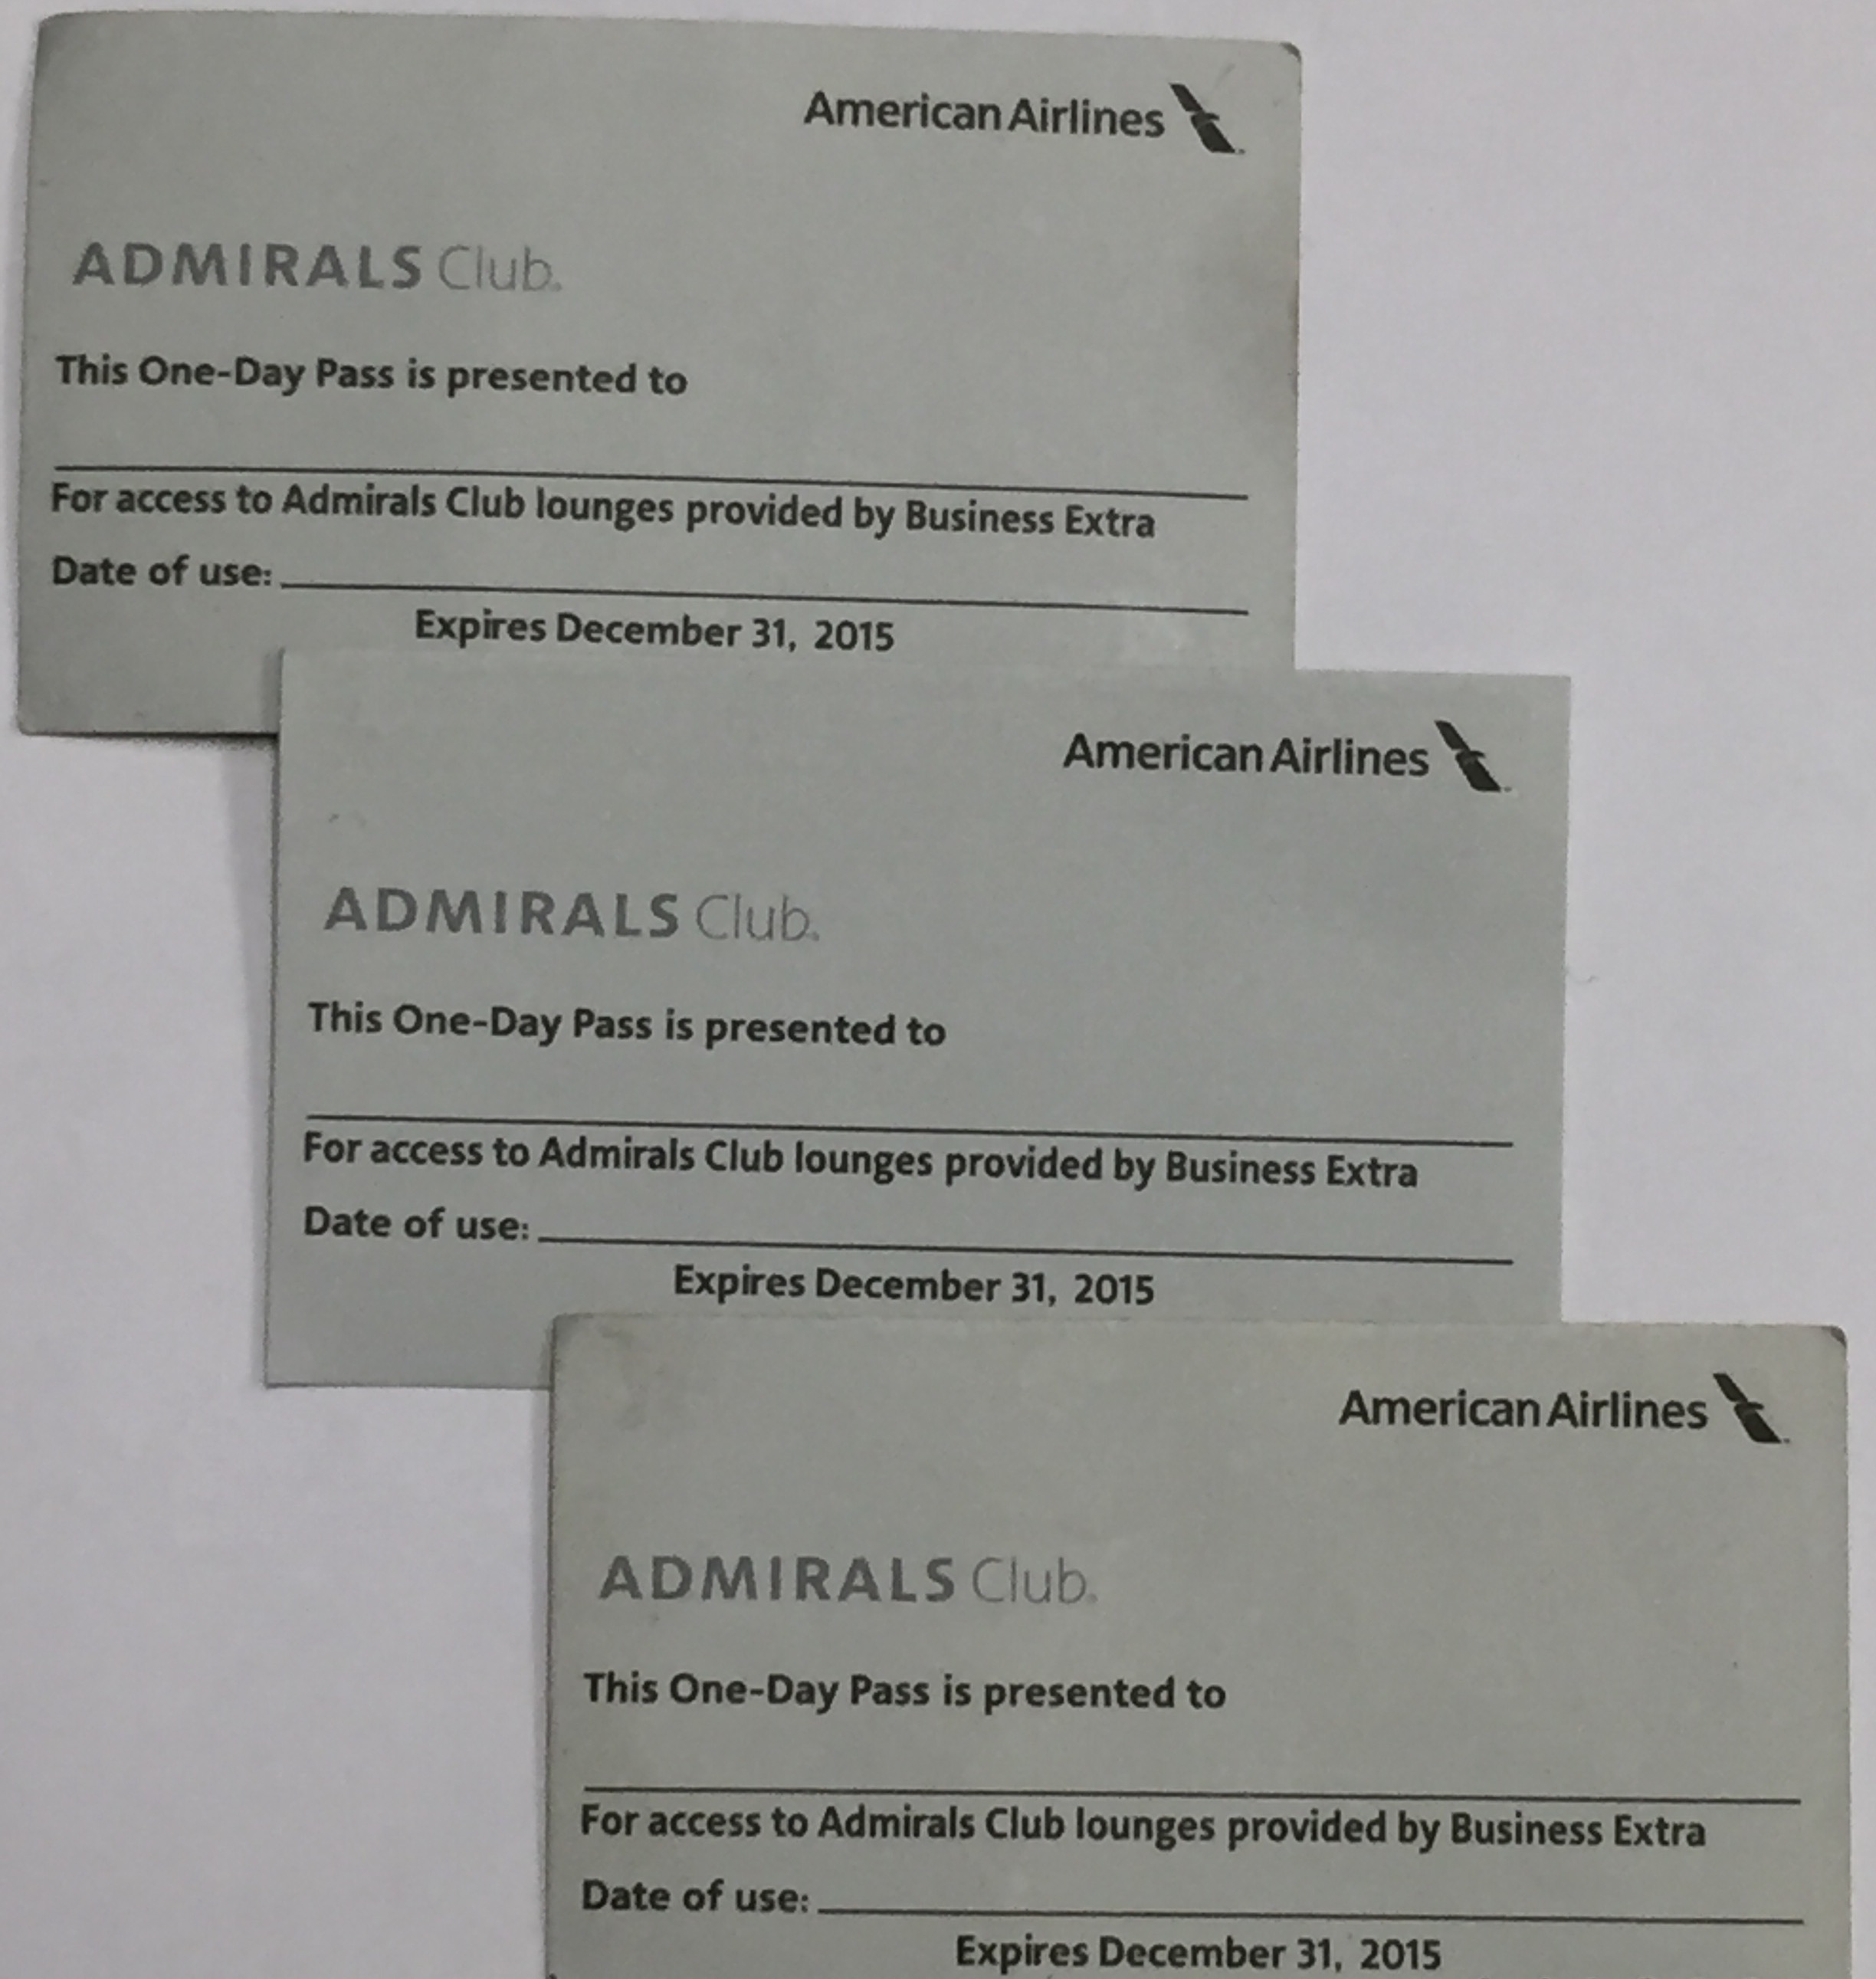 American Airlines Admirals Club Passes 12-31-15